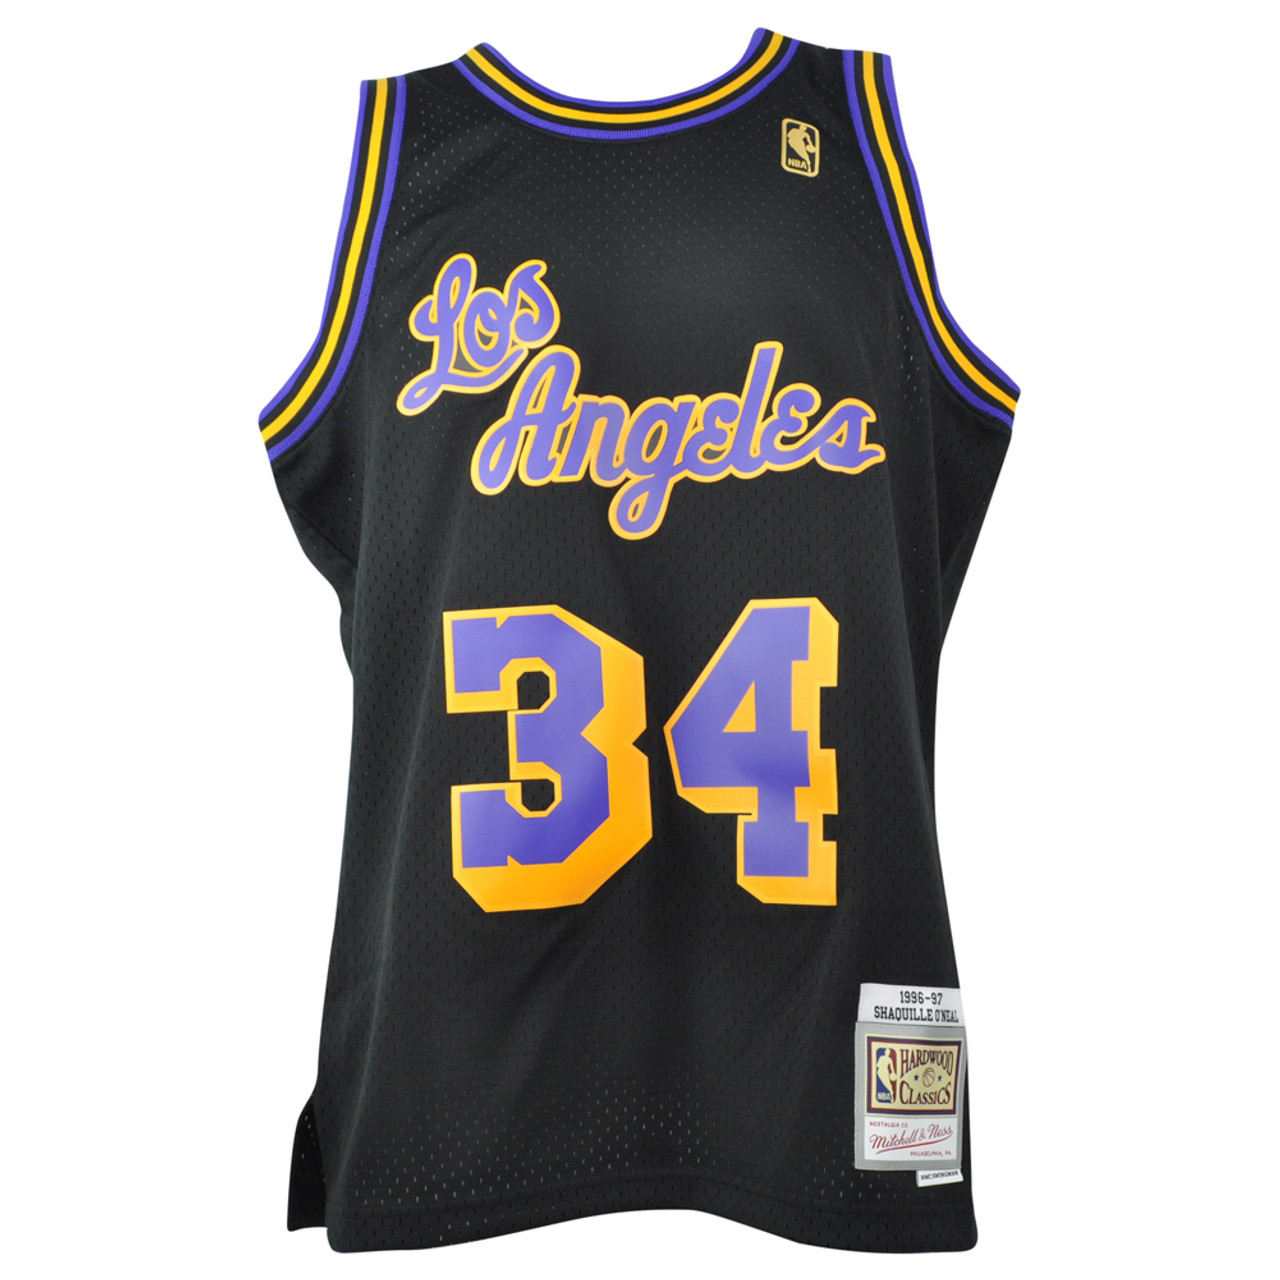  Mitchell & Ness Shaquille O'Neal Lakers 1996-97 Swingman Jersey  Black & Light Blue (Los Angeles Lakers, Large) : Sports & Outdoors